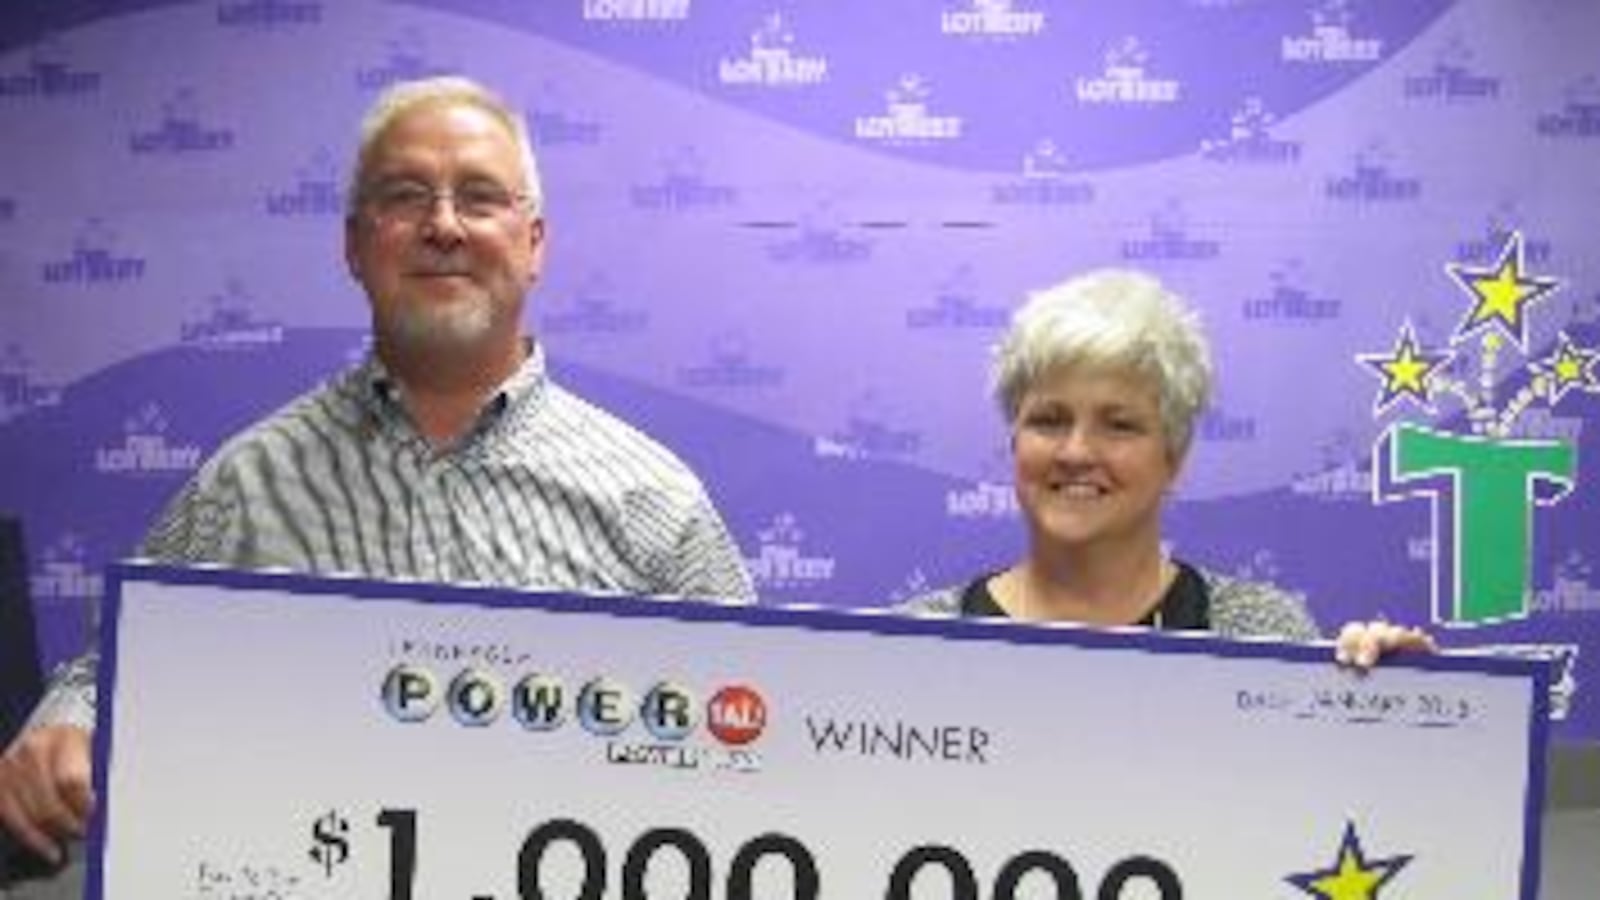 A couple from Morristown, Tenn., wins $1 million in 2015 from the Tennessee Education Lottery, which reports raising more than  $3.5 billion for education programs since its inception in 2004. One of the three winning tickets for the most recent Powerball drawing, for a world-record jackpot of $1.58 billion, was sold in Munford, Tenn.